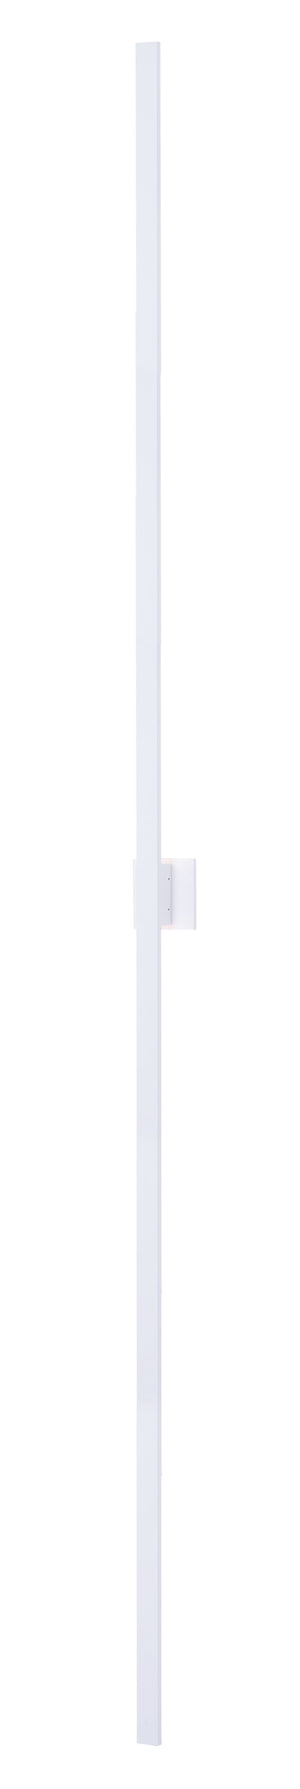 Alumilux Sconce 96' 2 Light Outdoor Wall Mount in White